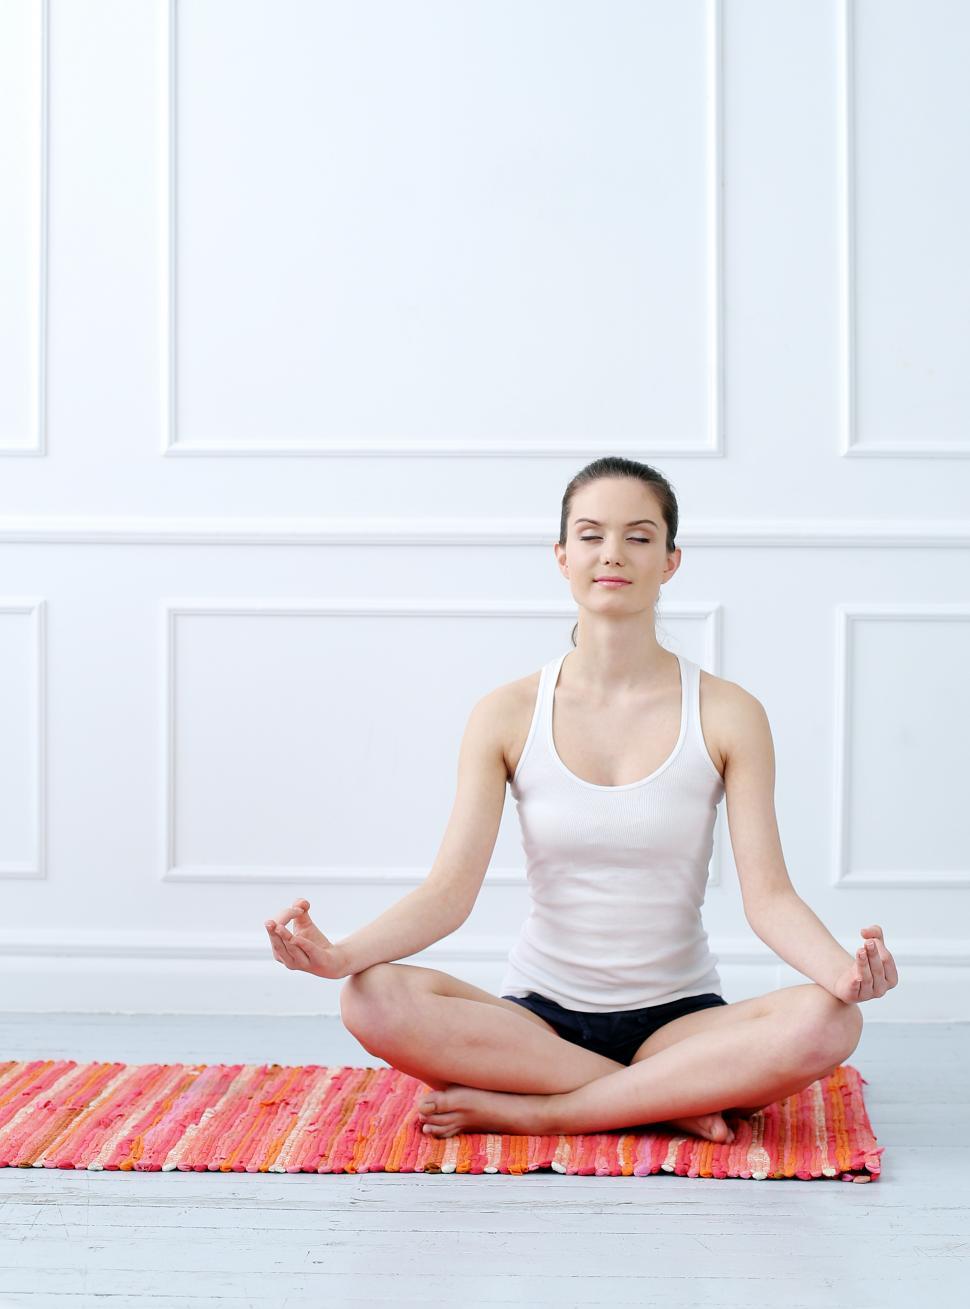 Free Image of Lifestyle. Woman during yoga exercise at home 